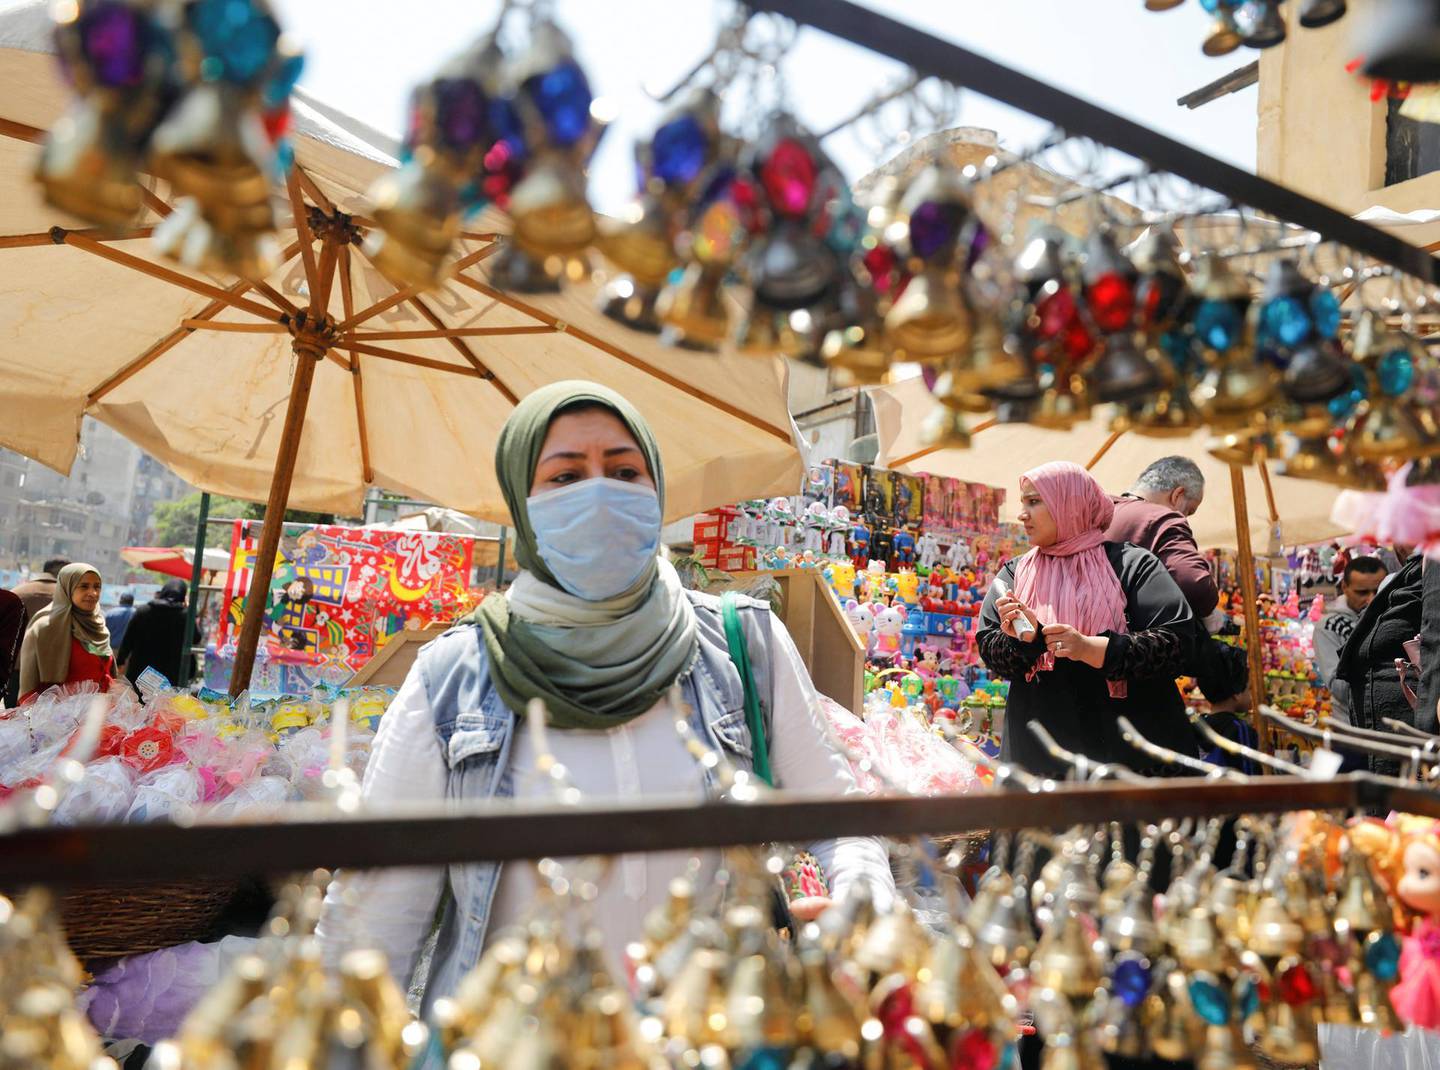 A woman wearing a protective face  mask, amid concerns over the coronavirus disease (COVID-19) buys traditional Ramadan lanterns, called "Fanous" which are displayed for sale at a stall, ahead of the Muslim holy month of Ramadan in Cairo, Egypt, April 12, 2020. REUTERS/Mohamed Abd El Ghany